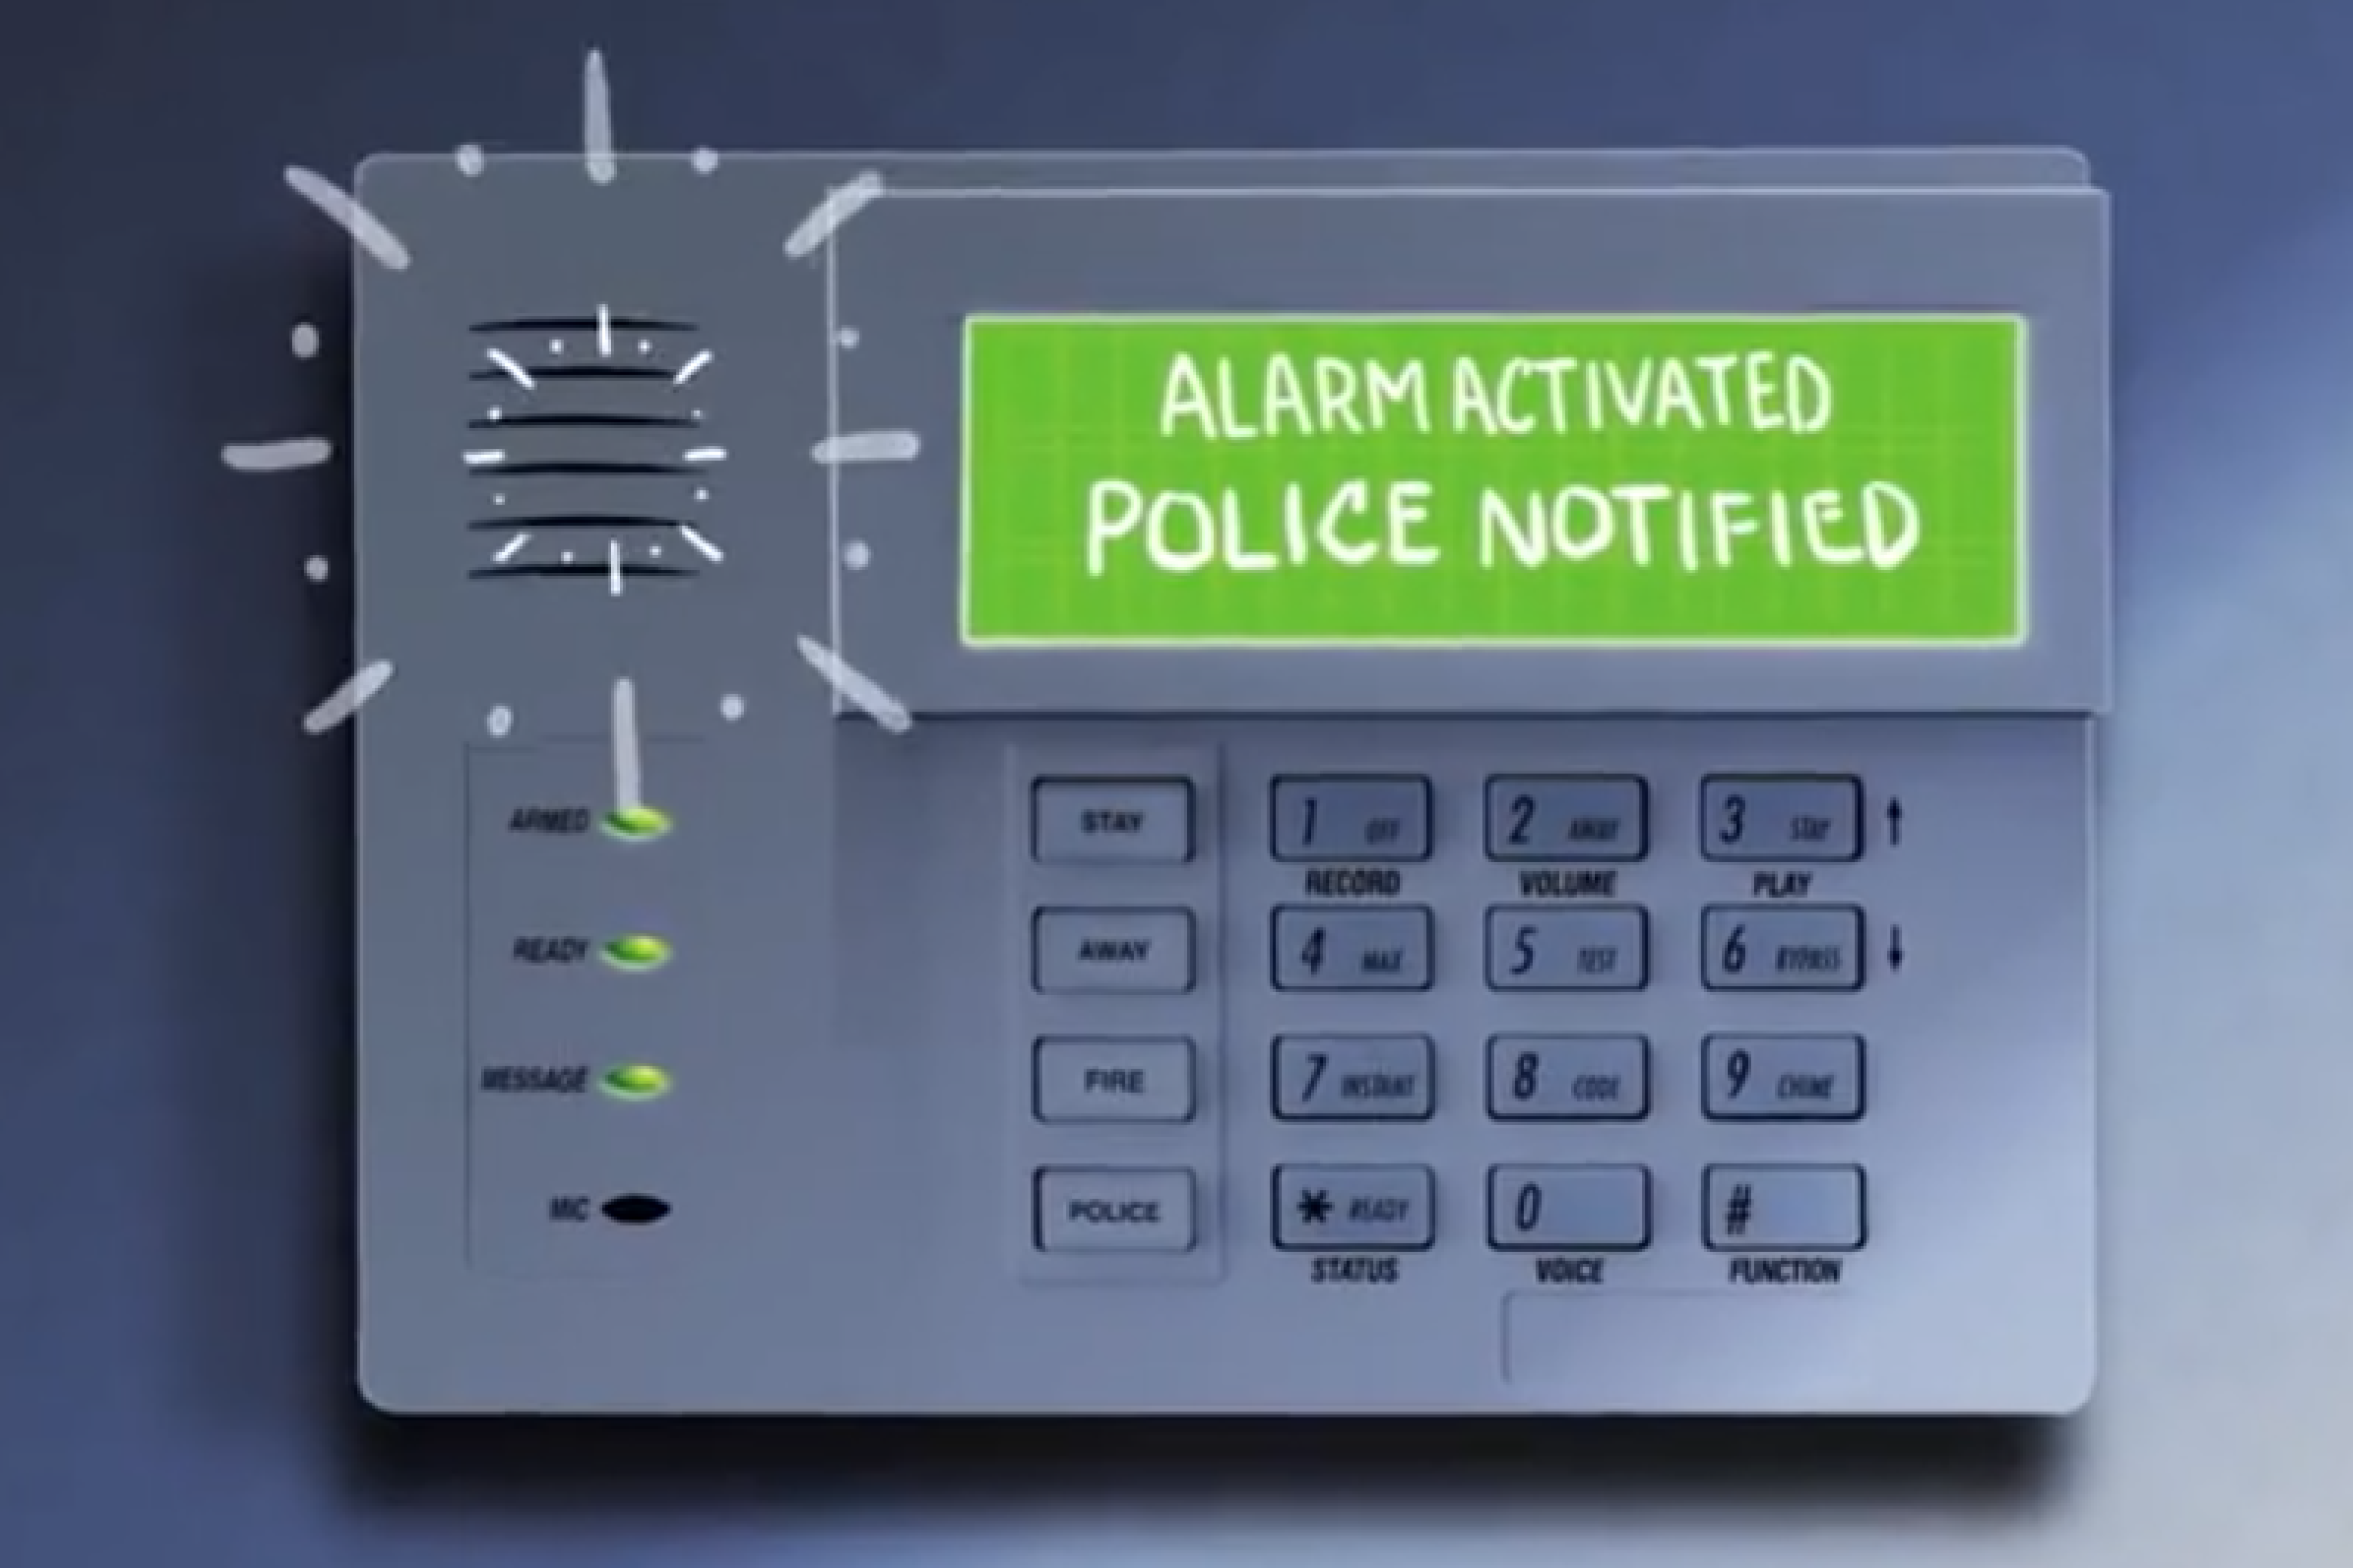 alarm keypad with alarm activated police notified on screen